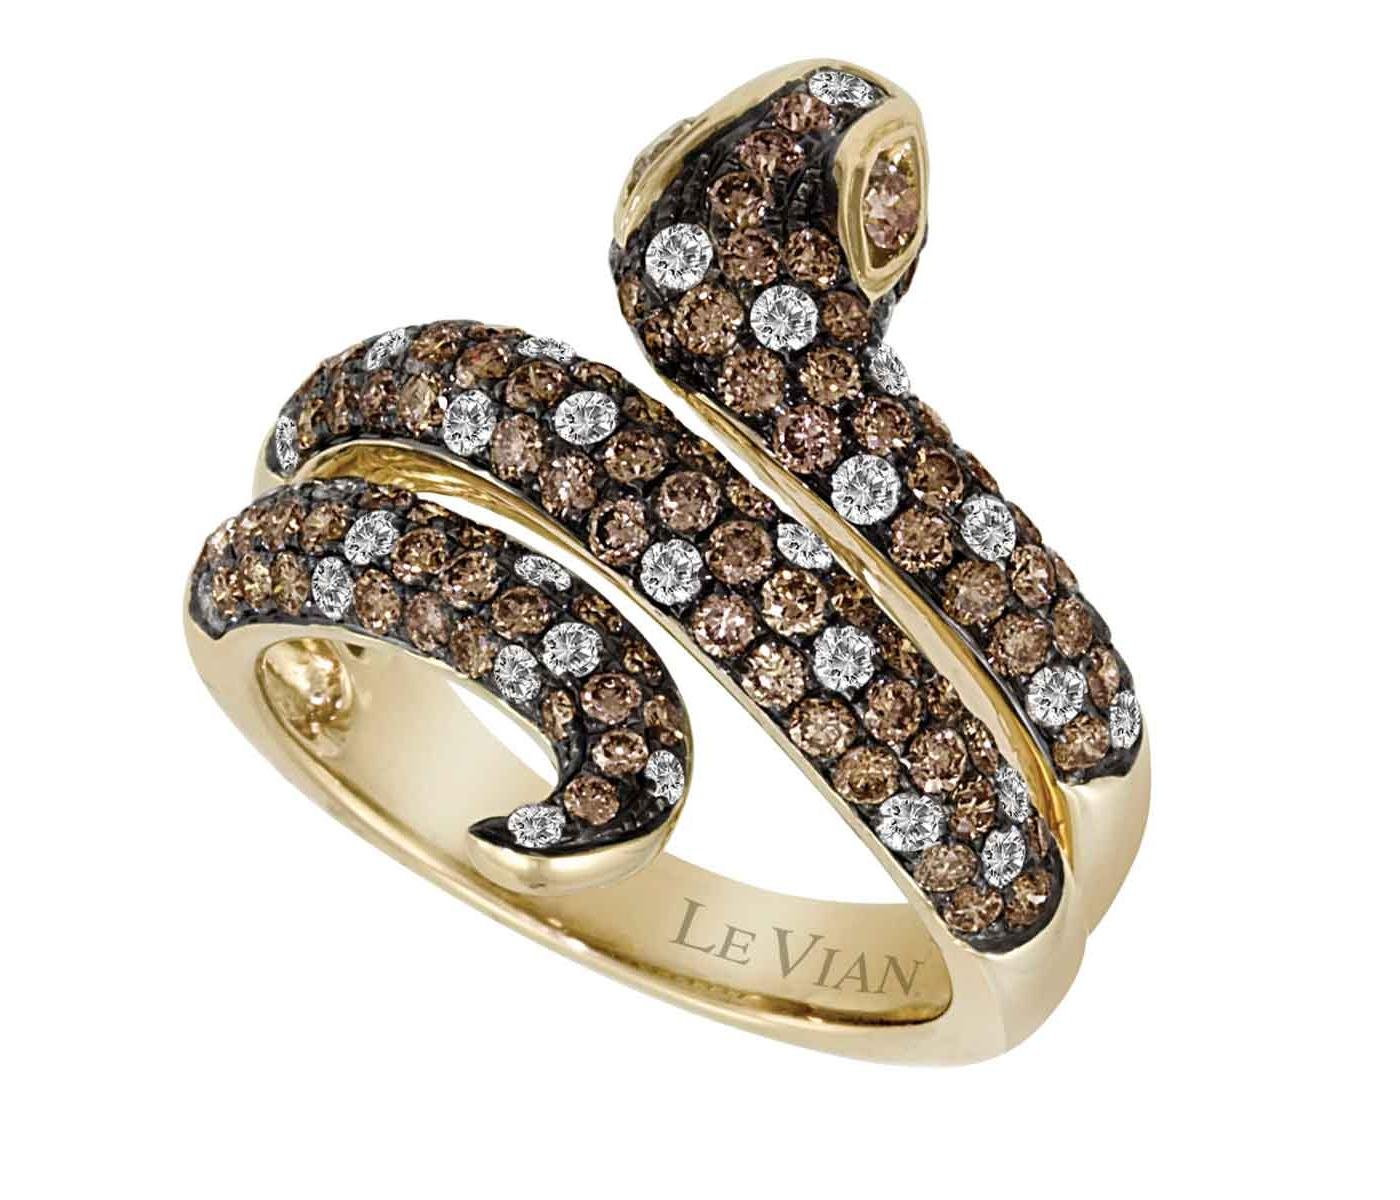 Ring by Le Vian